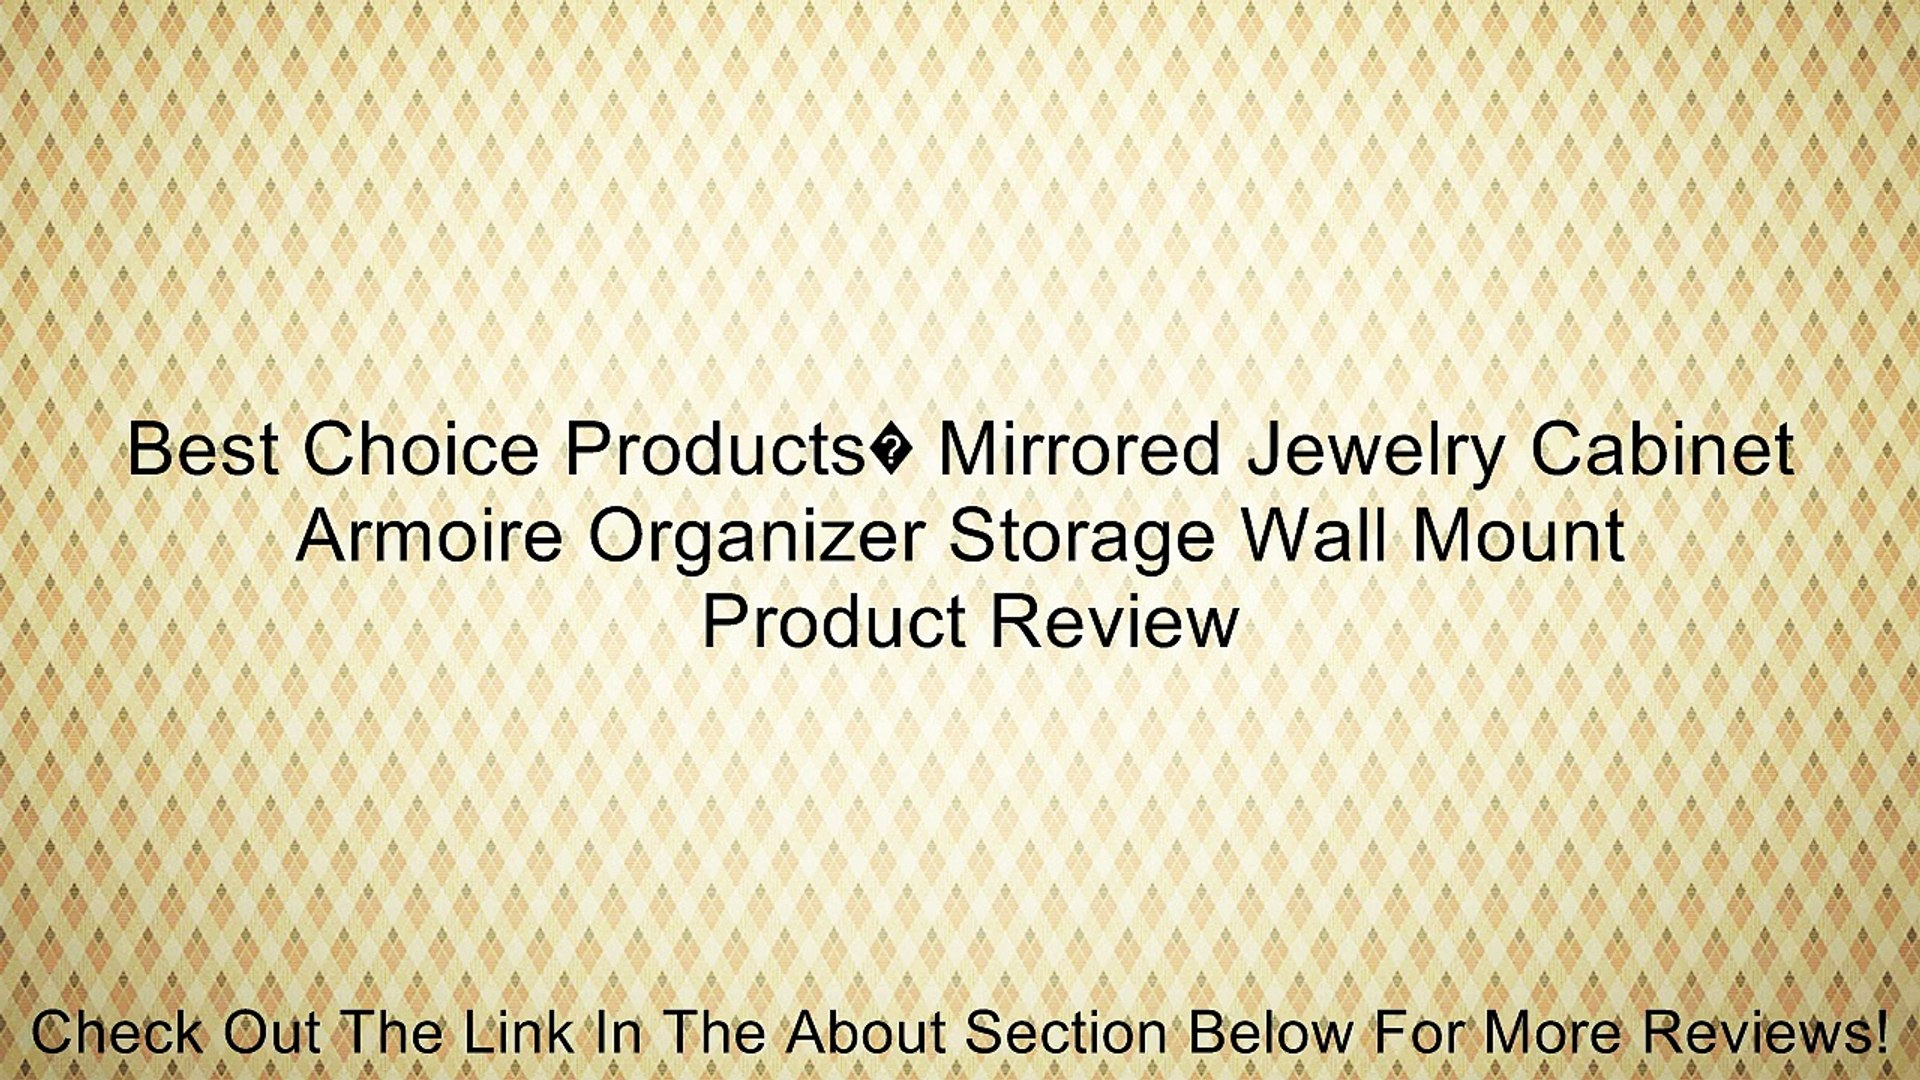 Best Choice Products Mirrored Jewelry Cabinet Armoire Organizer